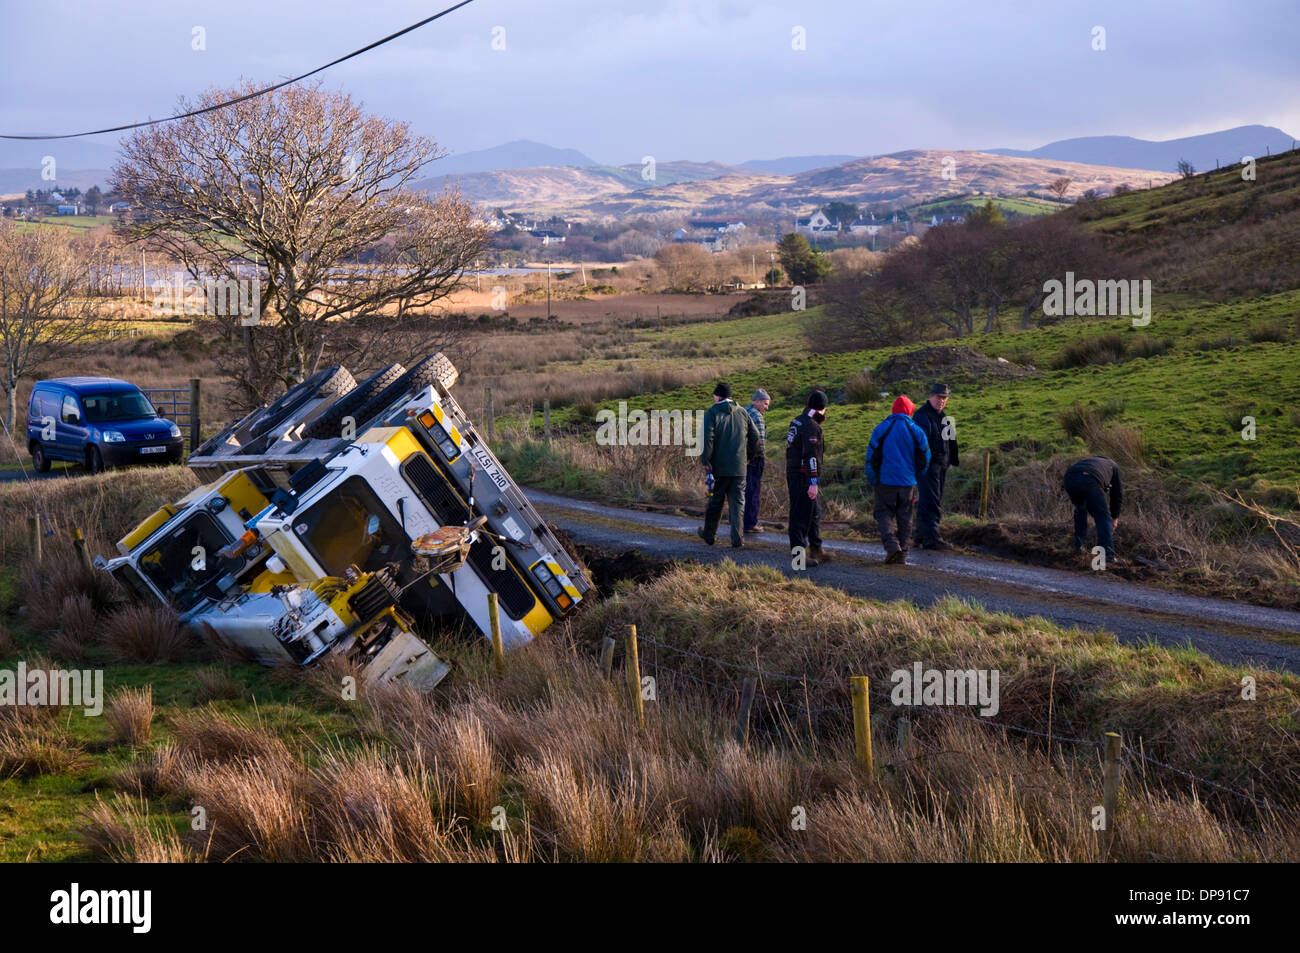 Ardara, County Donegal, Ireland. 9th January 2014. A heavy crane fell off a country road into a ditch after heavy rains had destabilised the verge. Nobody was hurt in the accident. Local people at the scene investigate. Photo By:Richard Wayman/Alamy Live News Stock Photo